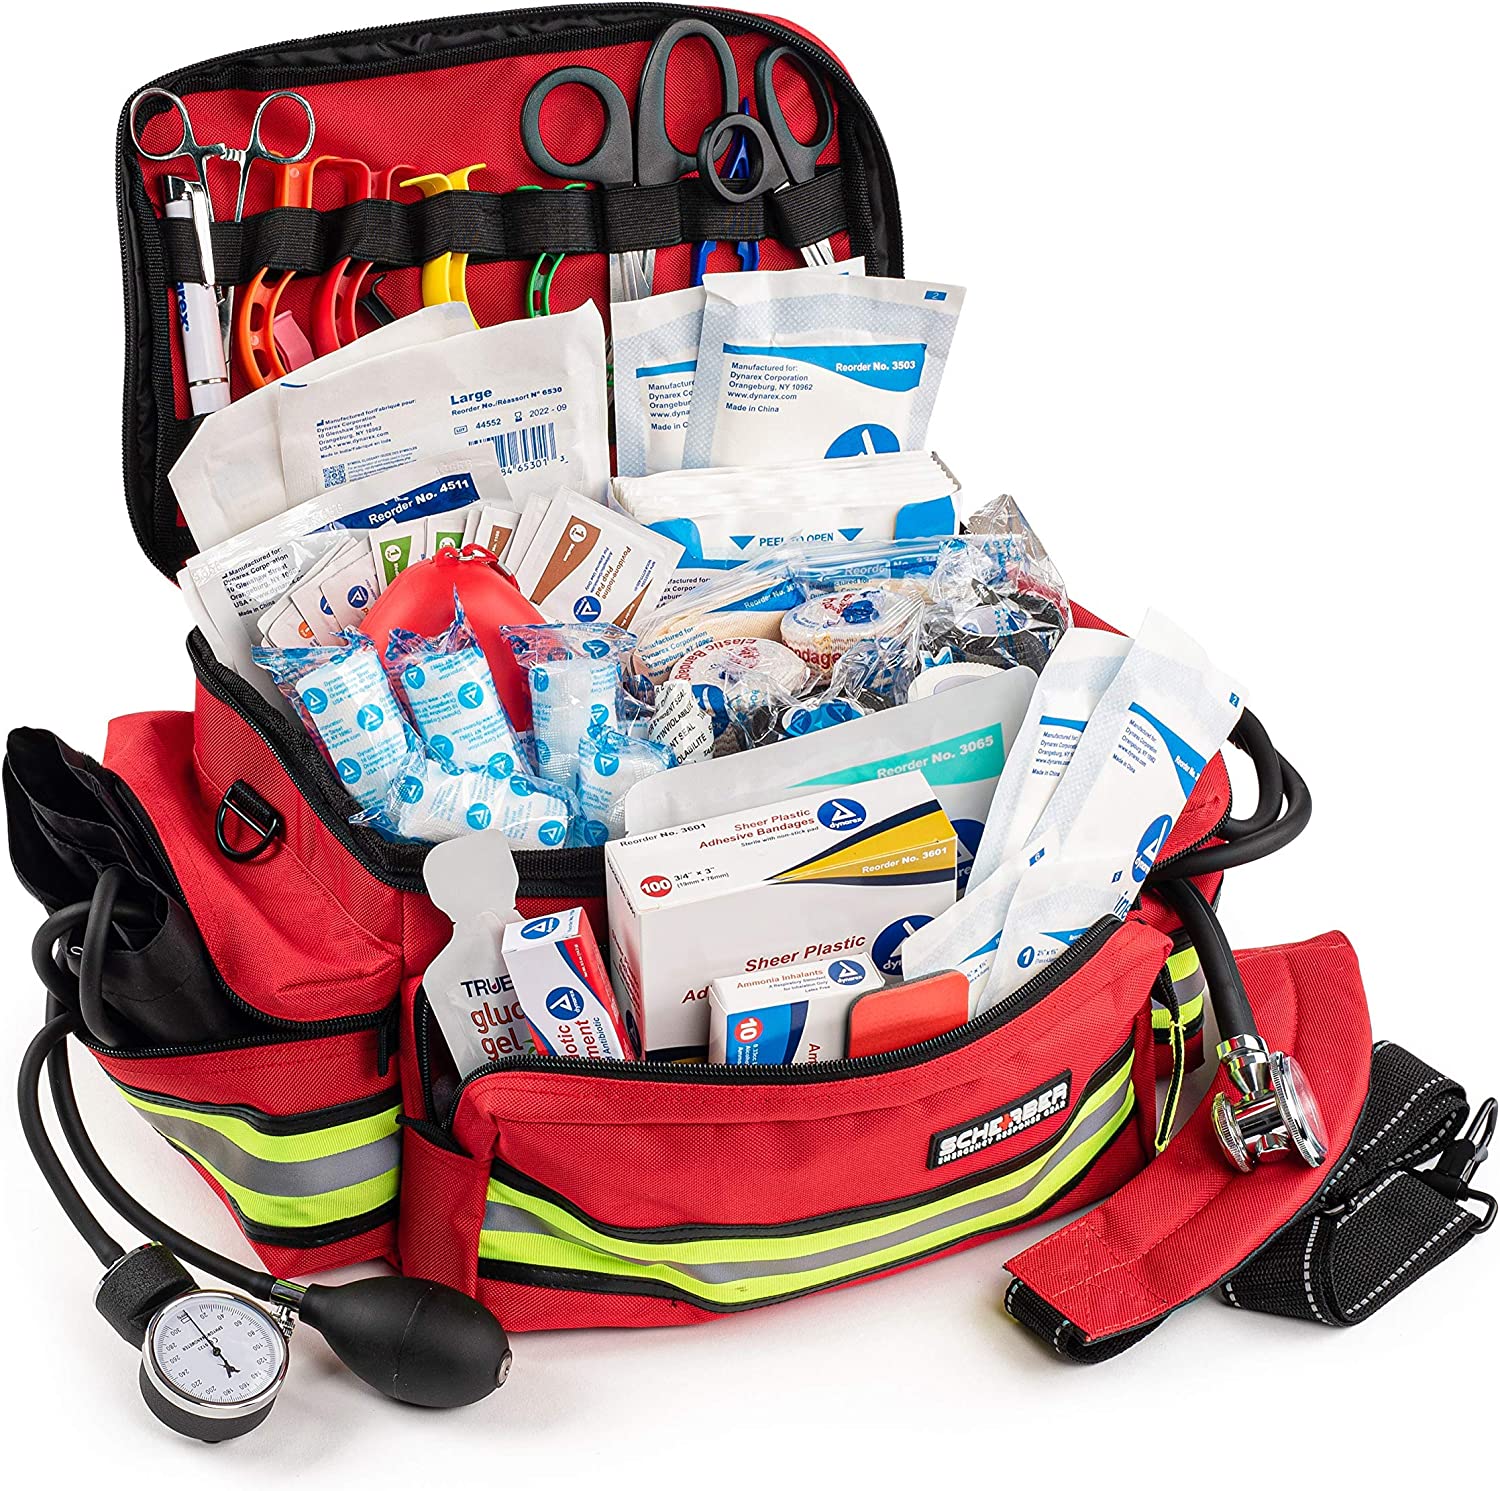 Scherber First Responder Bag | Fully-Stocked Professional Essentials EMT/EMS Trauma Kit | Reflective Bag w/8 Zippered Pockets & Compartments, Shoulder Strap & 200+ First Aid Supplies – Red